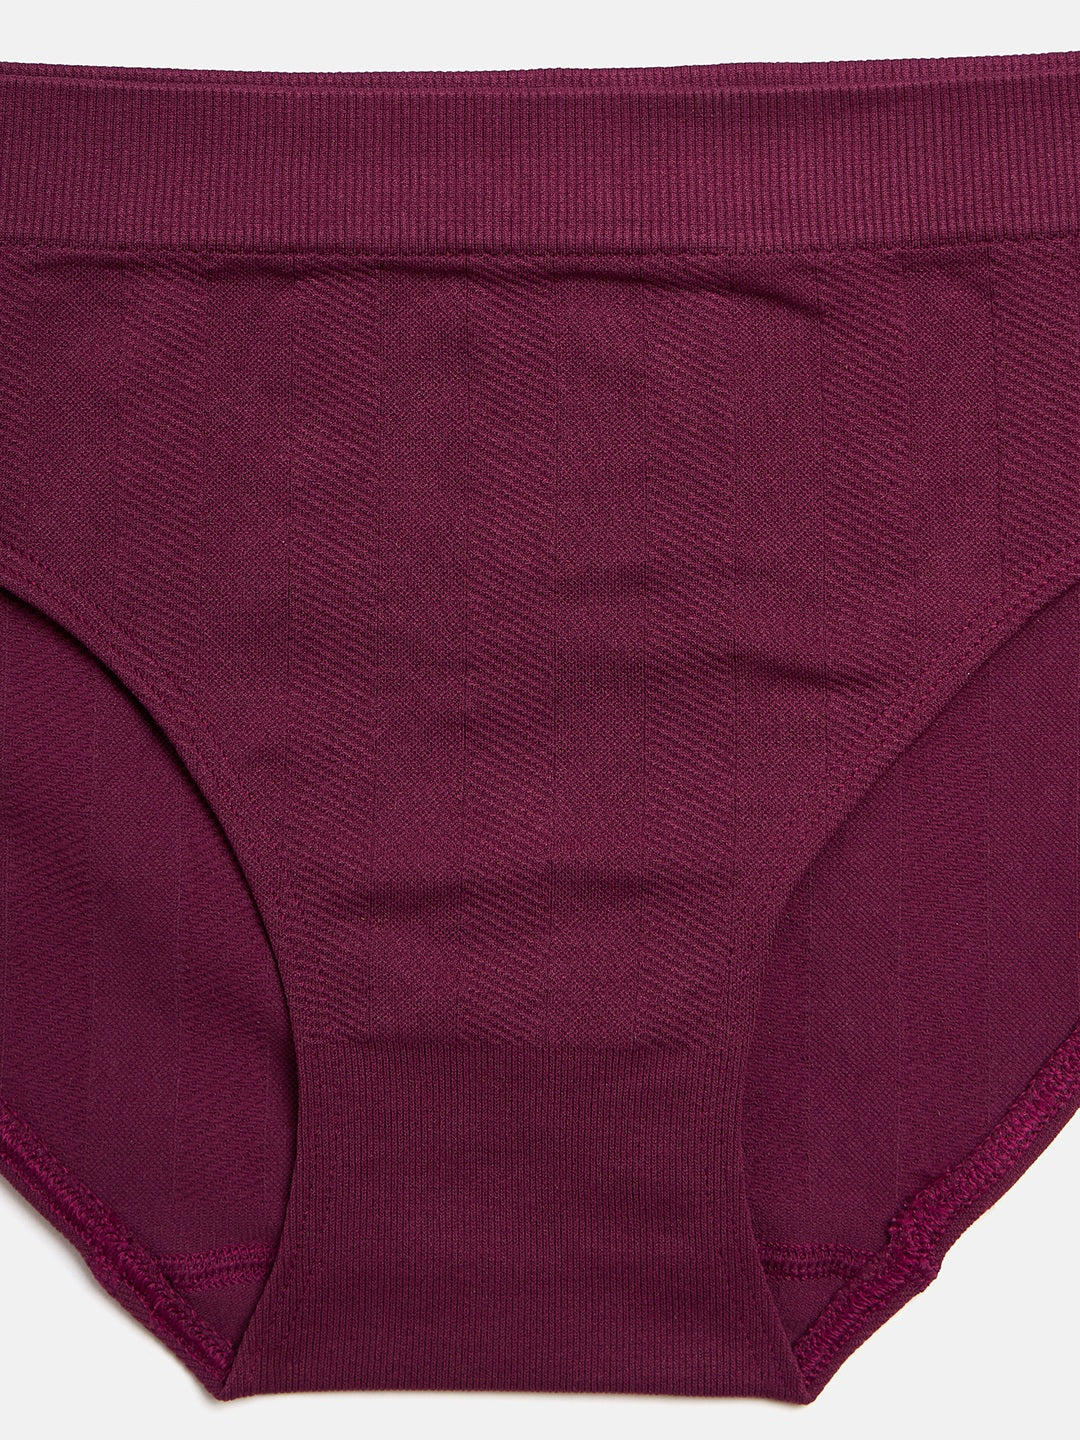 C9 Airwear Seamless Teen Rib Co-Ord Panty with Full Coverage